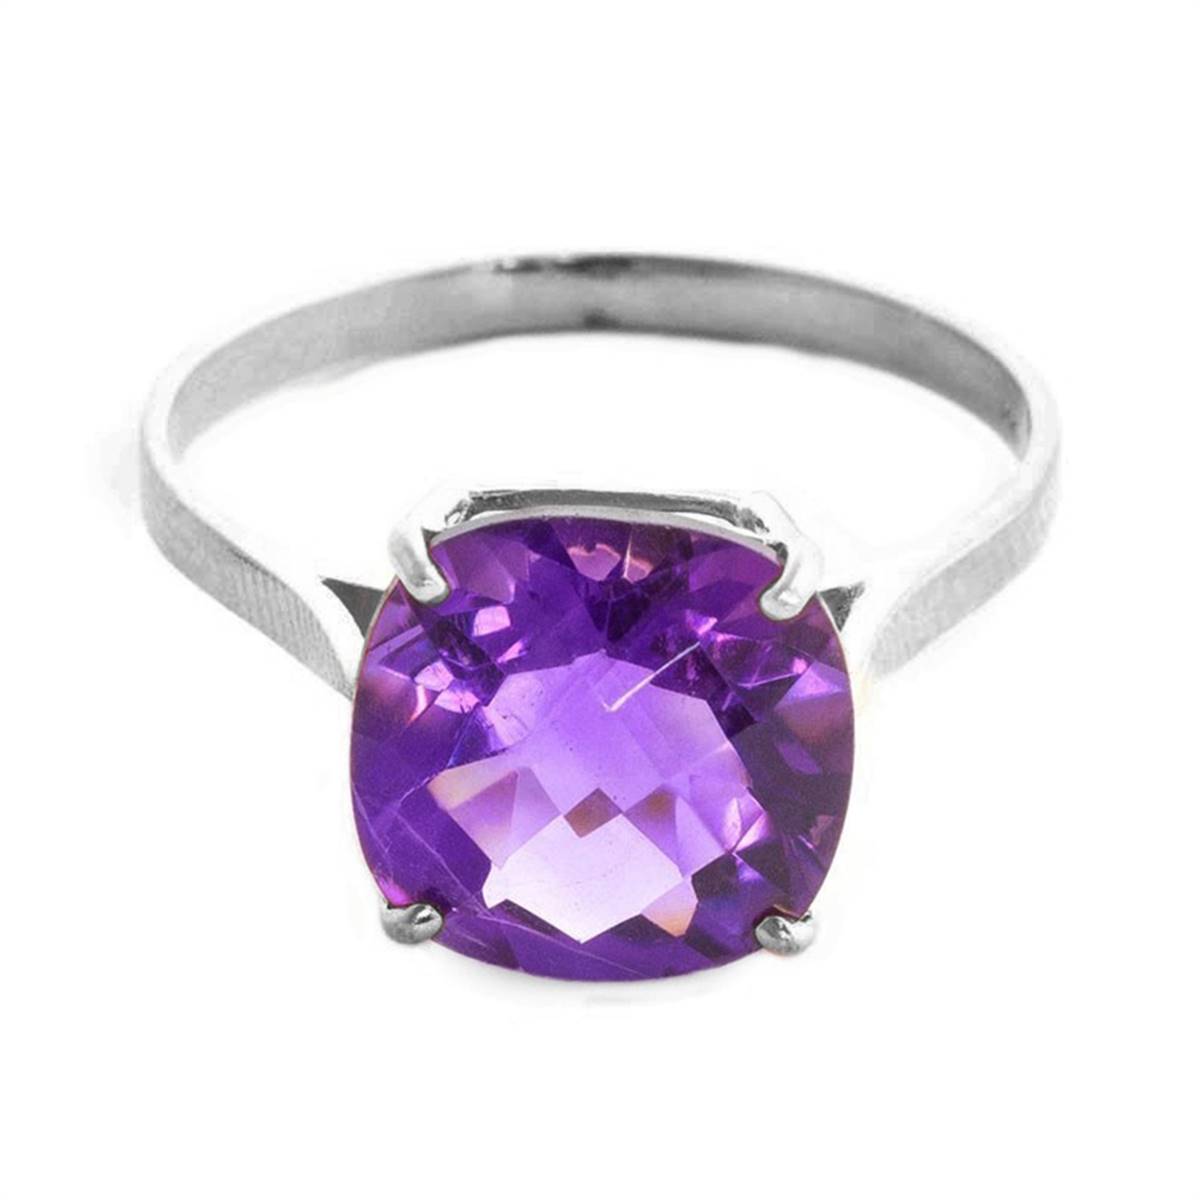 3.6 Carat 14K Solid White Gold Ring Natural Checkerboard Cut Purple Amethyst